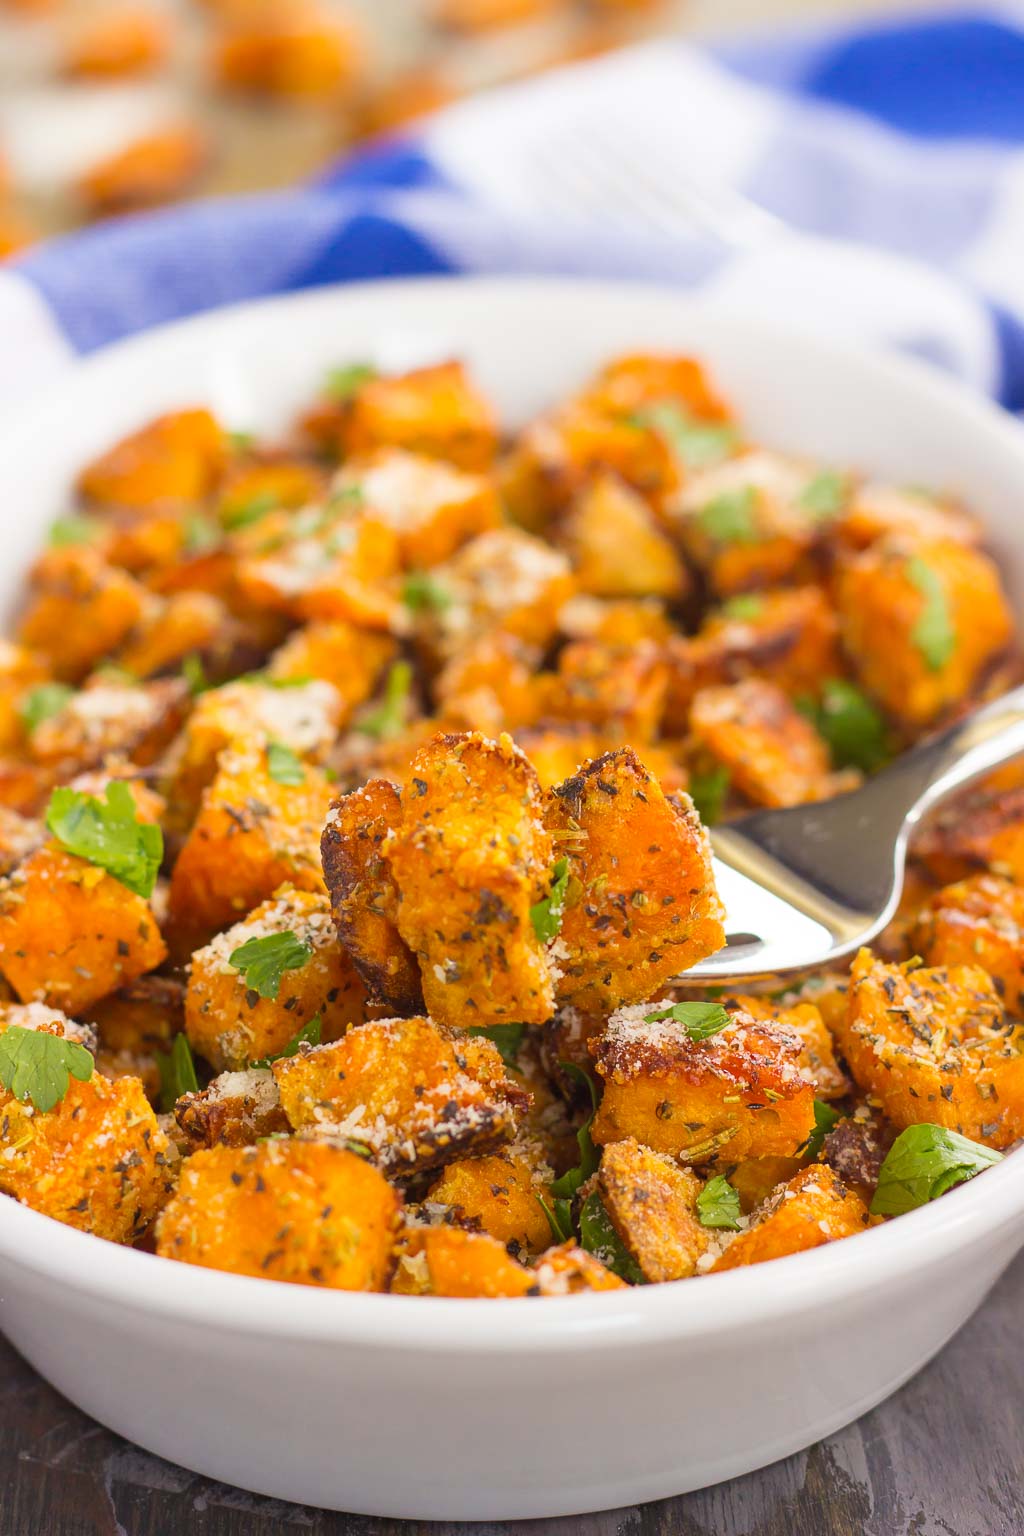 These Roasted Parmesan Herb Sweet Potatoes are seasoned with a blend of Parmesan cheese, garlic, and herbs. Roasted until crispy on the outside and soft on the inside, this easy side dish is full of flavor and perfect for just about any meal!